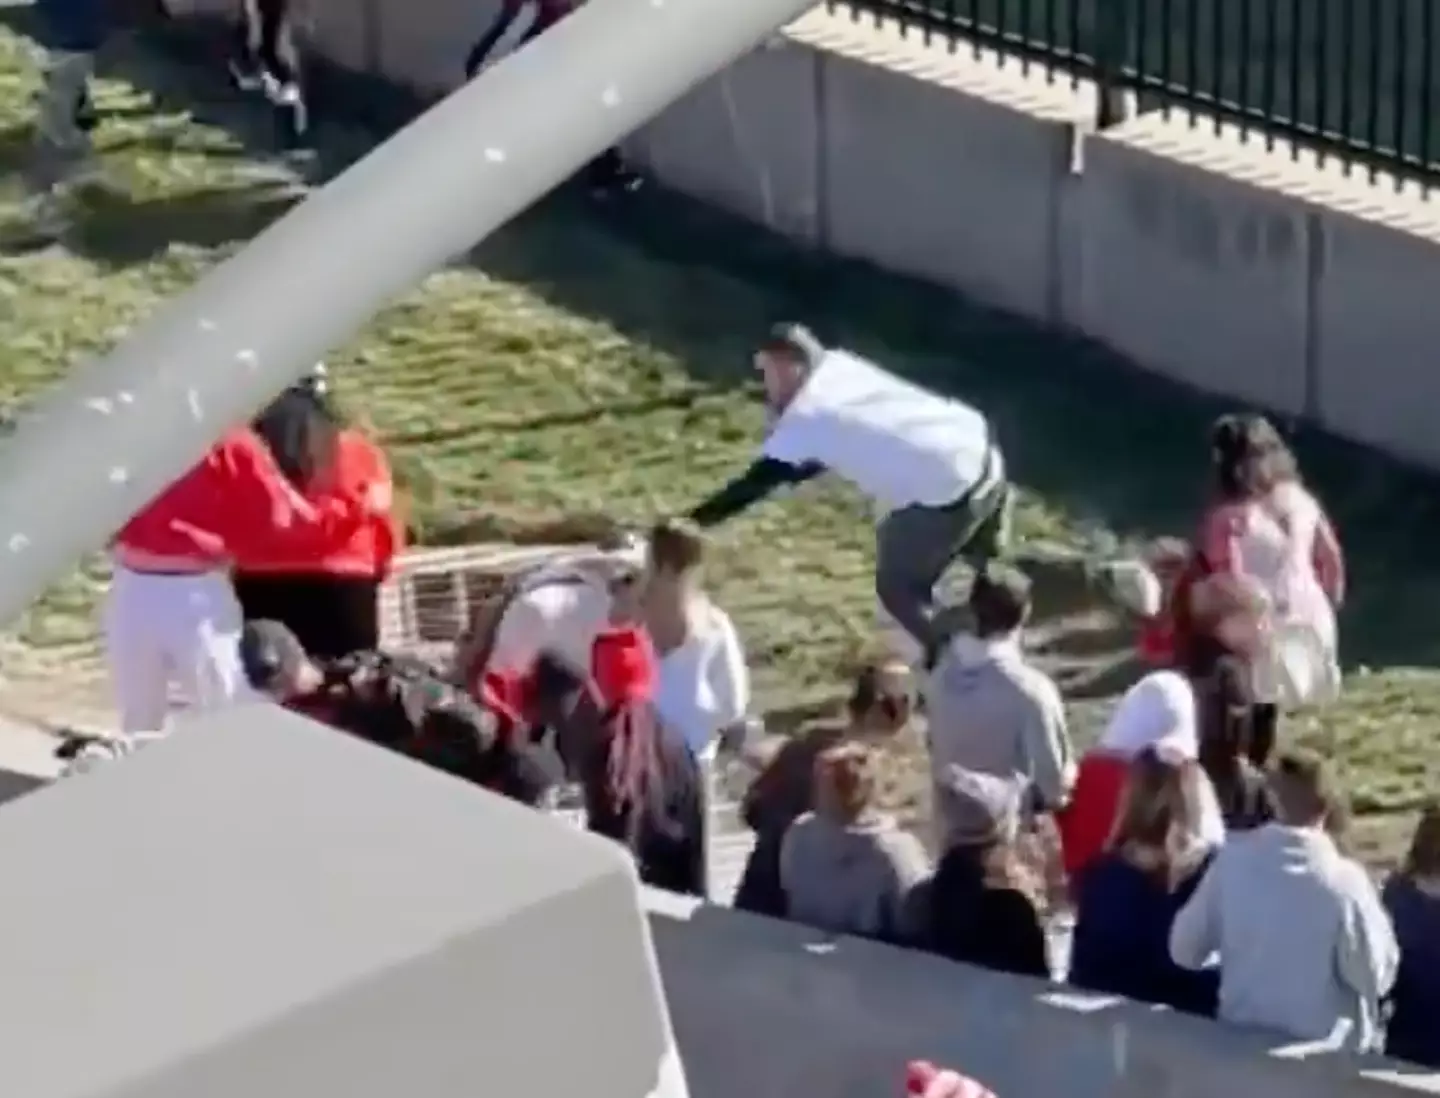 The fans can be seen holding the suspect to the ground.